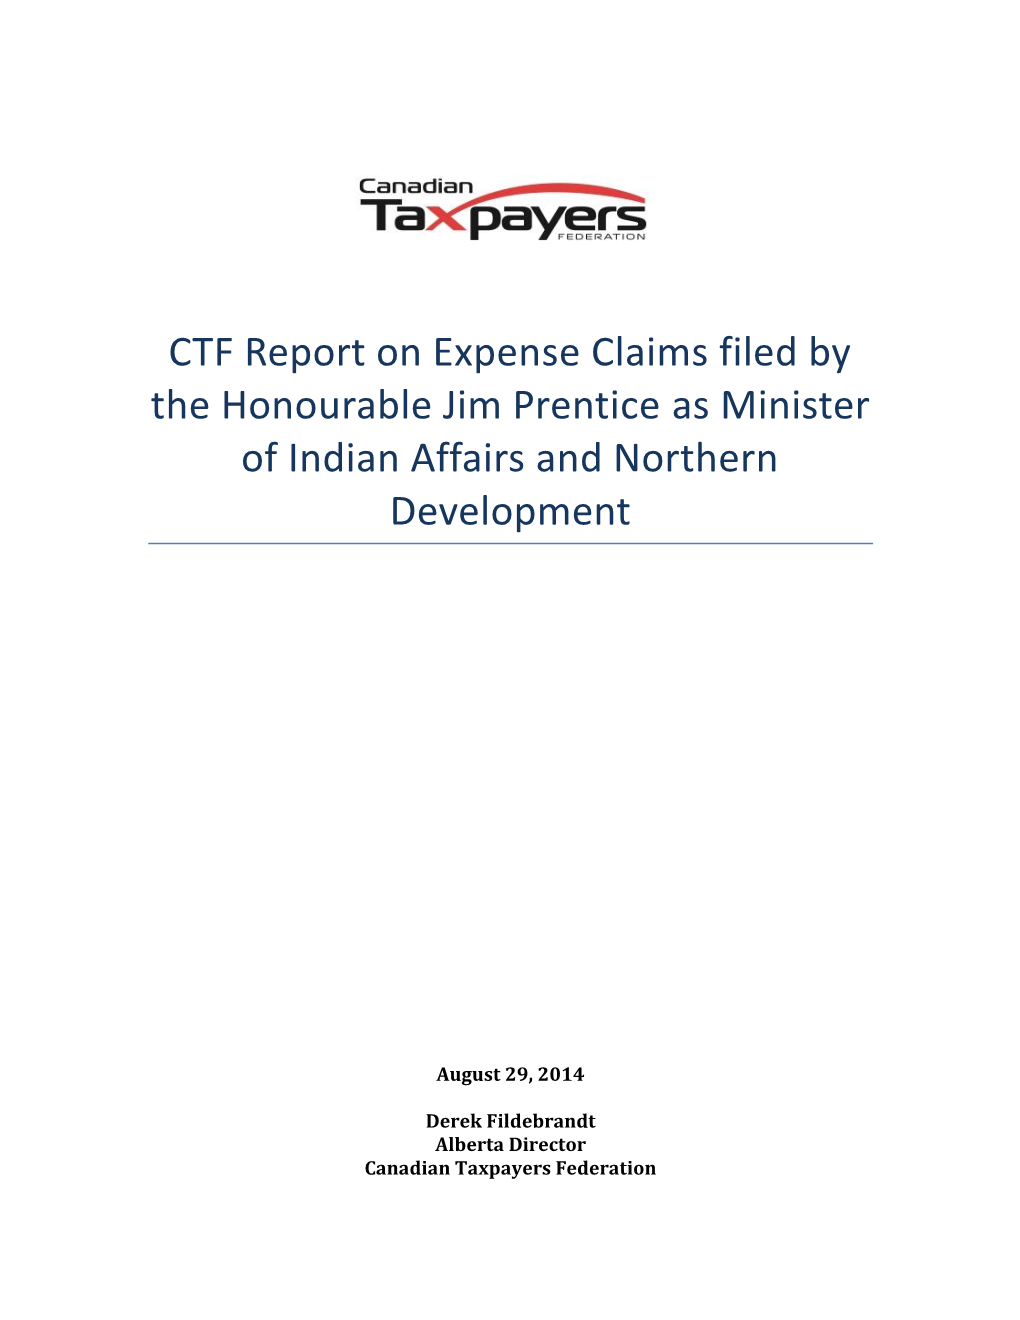 CTF Report on Expense Claims Filed by the Honourable Jim Prentice As Minister of Indian Affairs and Northern Development